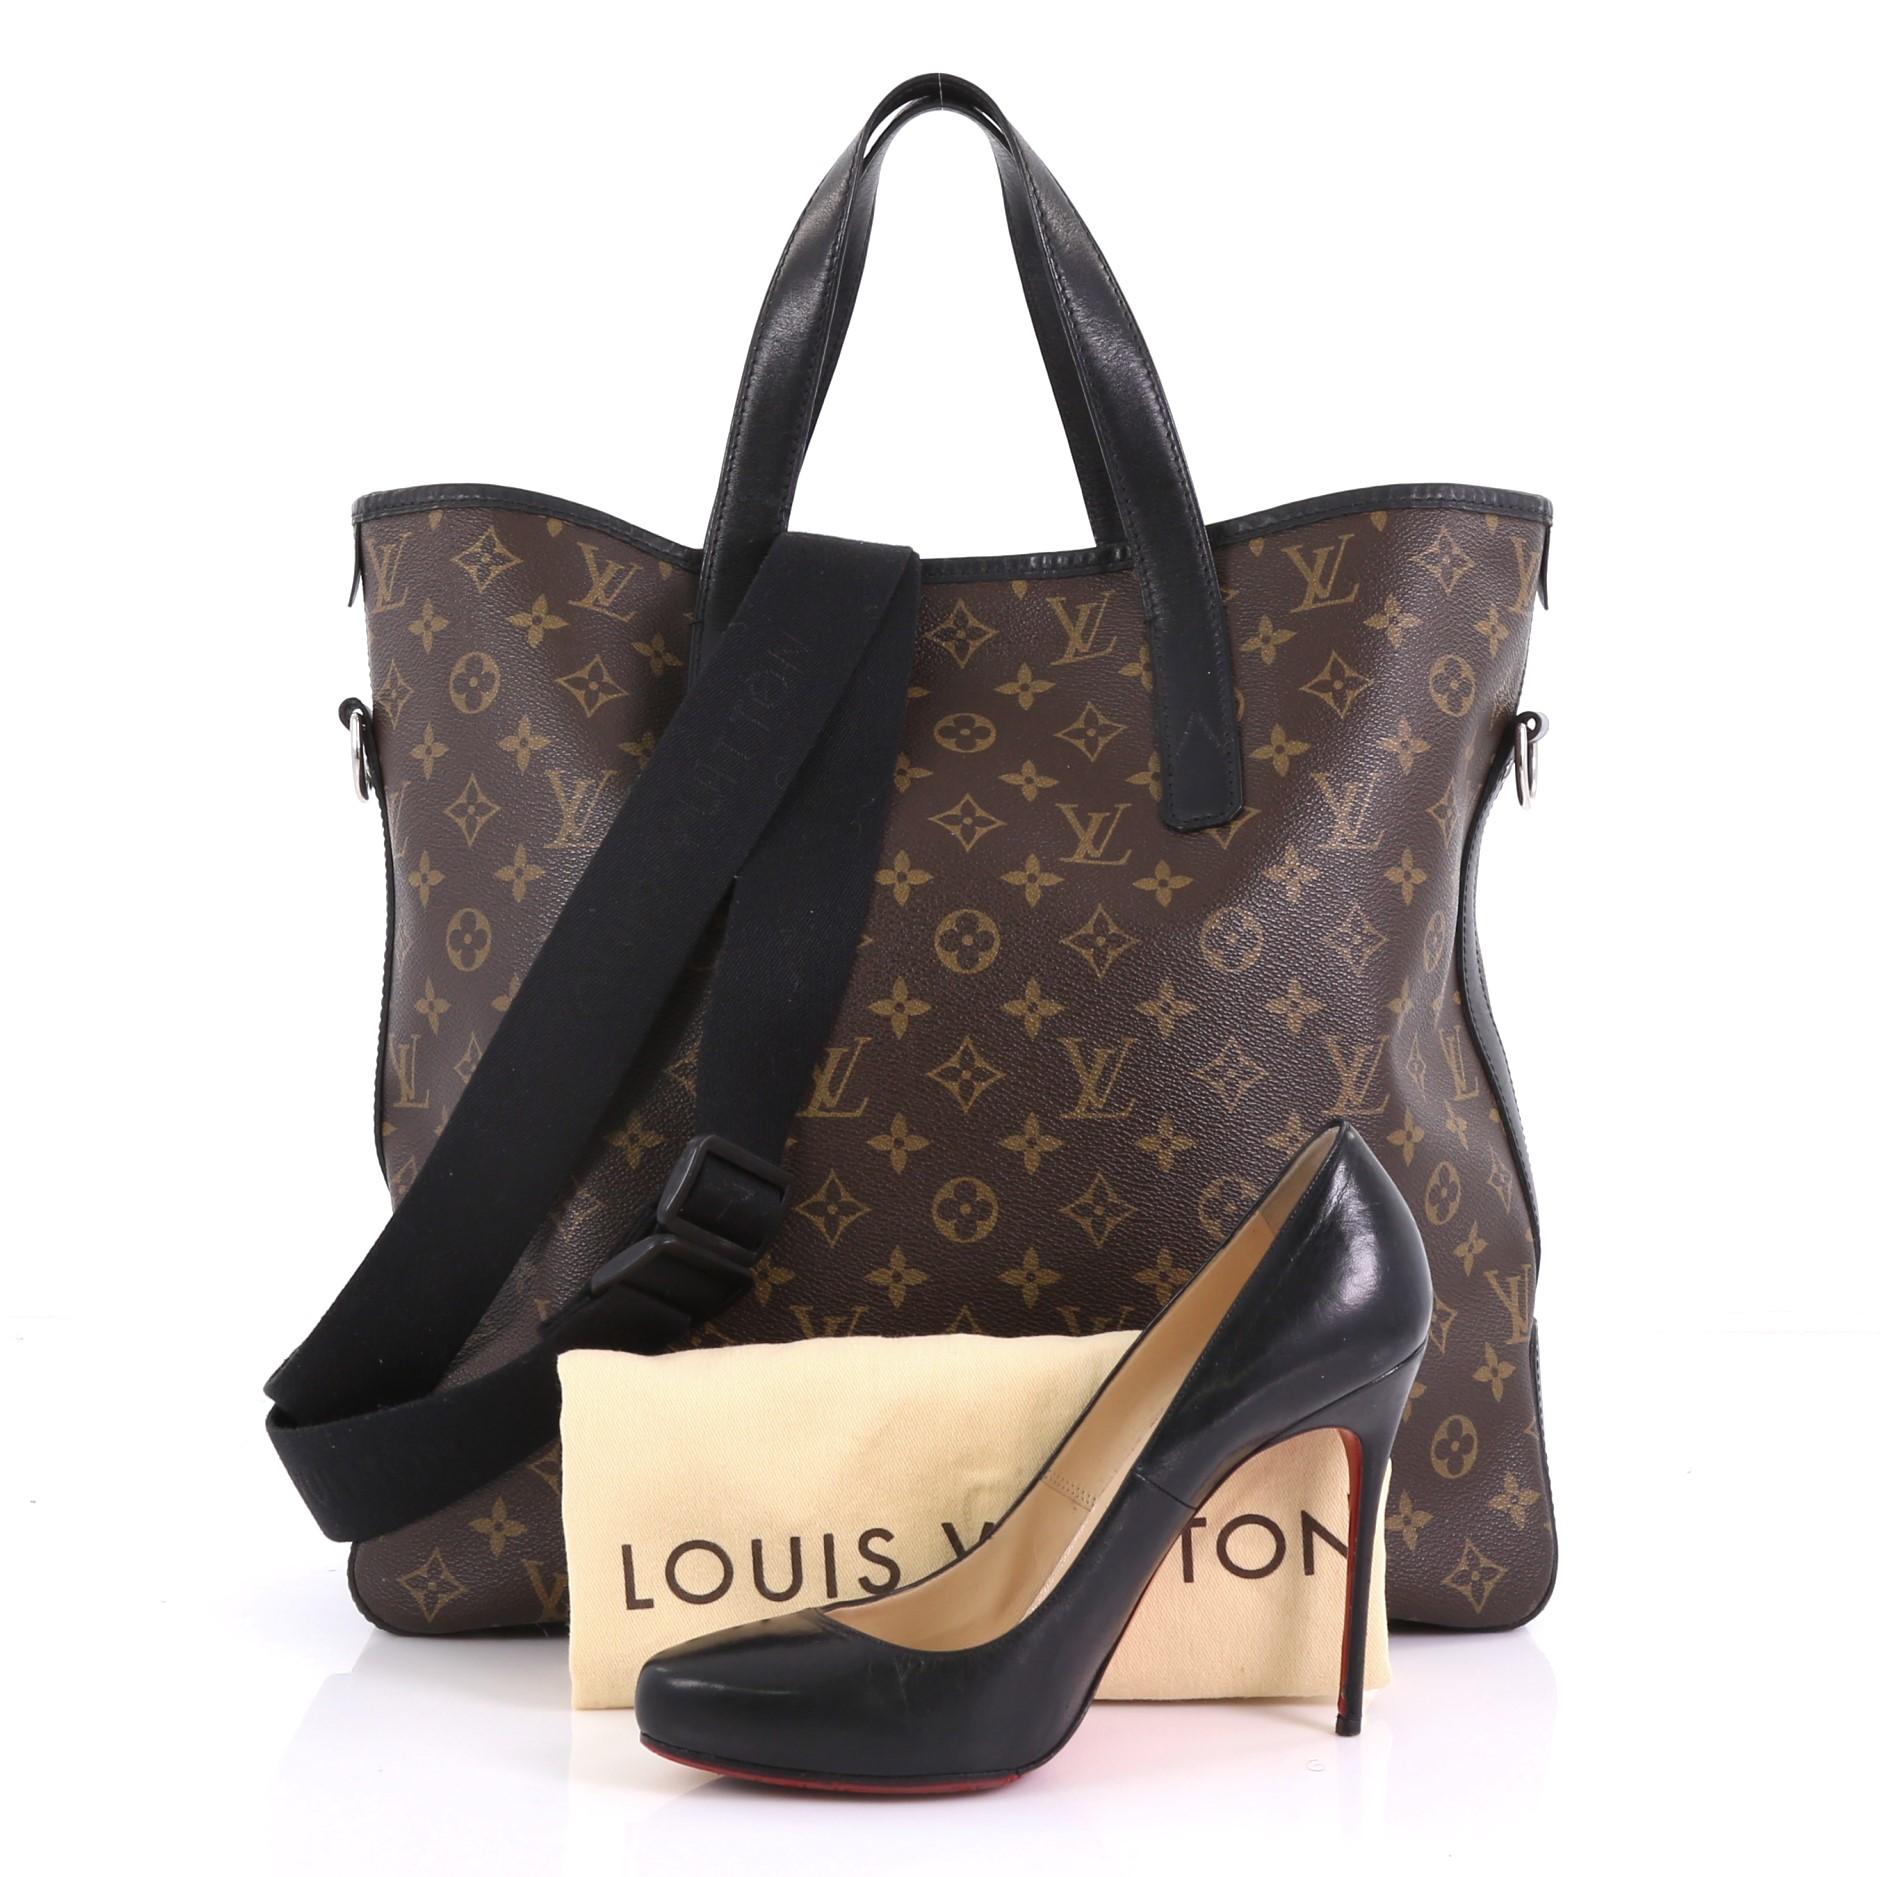 This Louis Vuitton Davis Handbag Macassar Monogram Canvas, crafted in brown monogram coated canvas and black leather, features dual flat leather handles, leather trim, protective base studs, and silver-tone hardware. Its magnetic snap closure opens